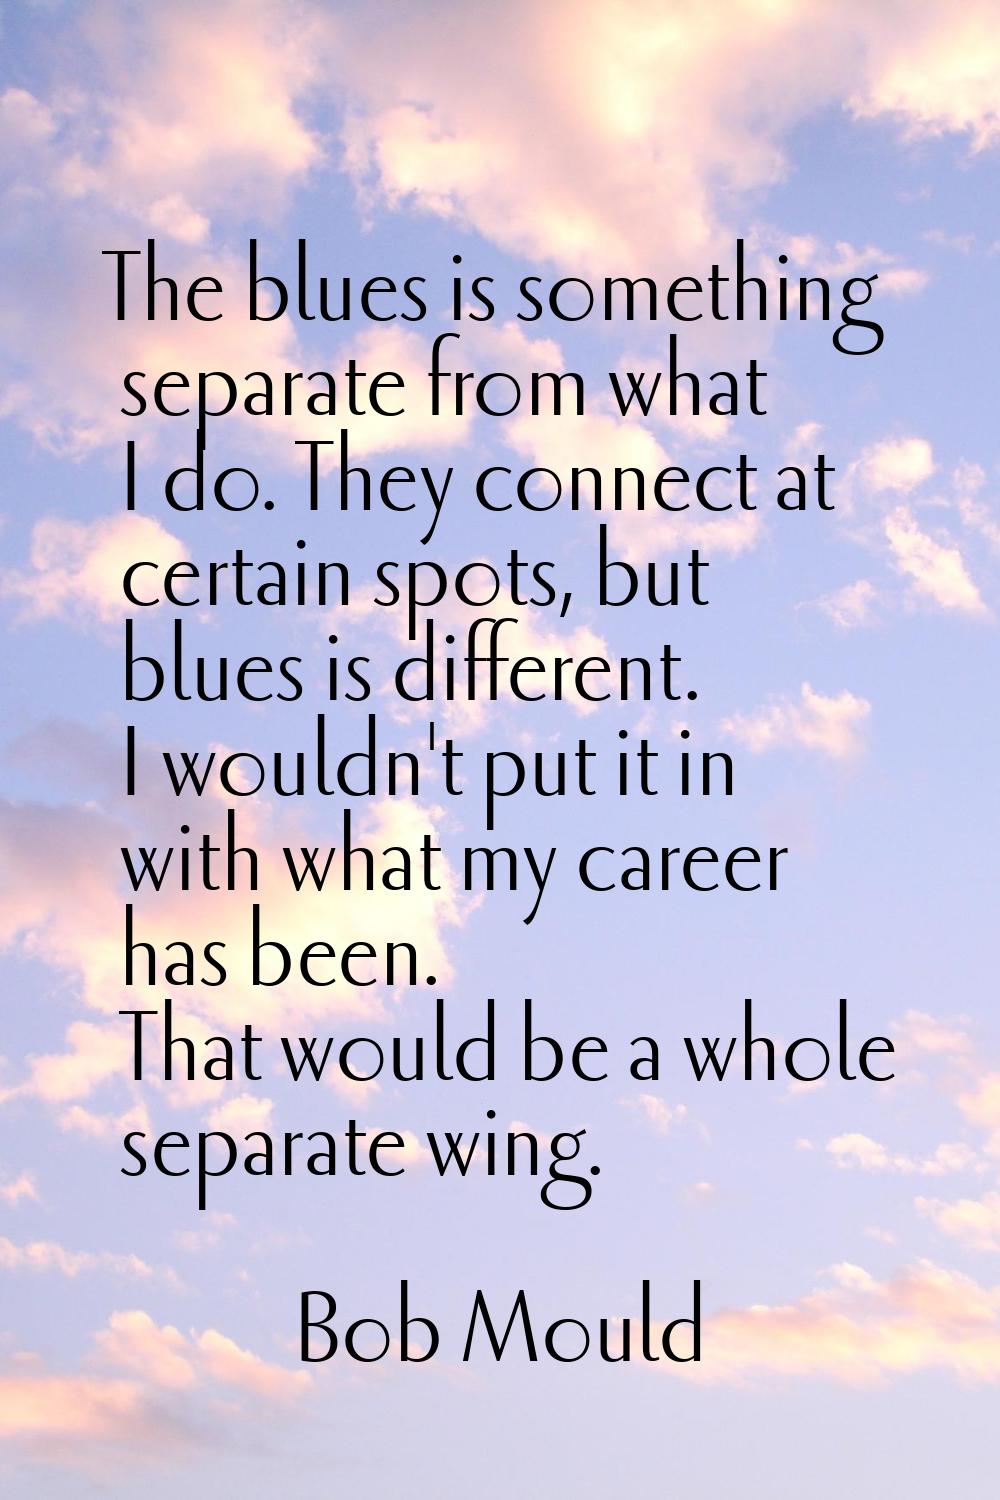 The blues is something separate from what I do. They connect at certain spots, but blues is differe